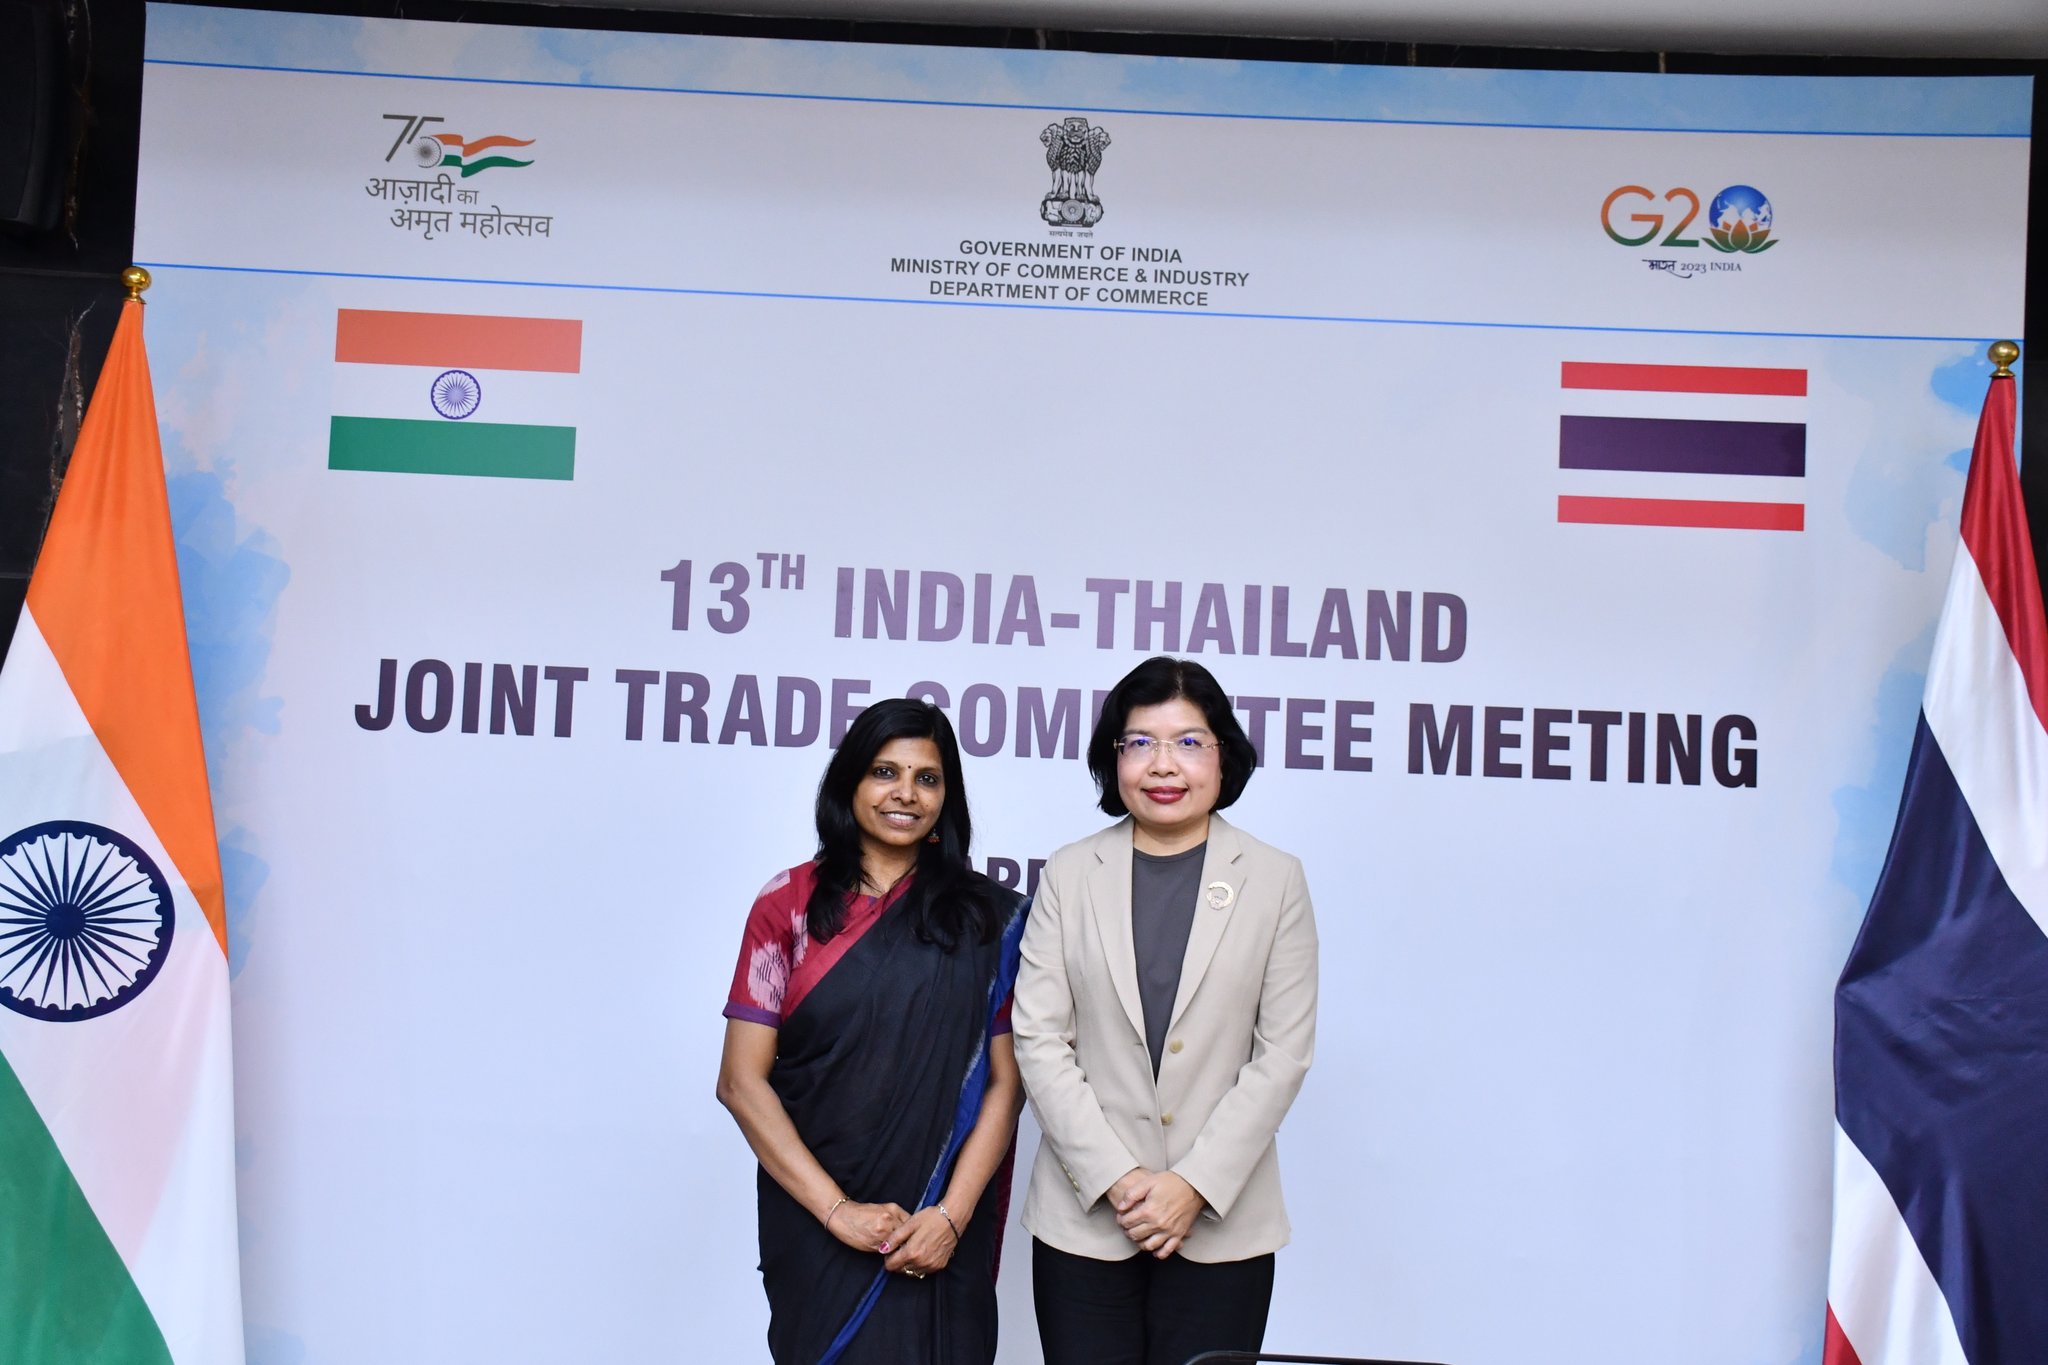 India-Thailand holds 13th trade committee meeting in New Delhi